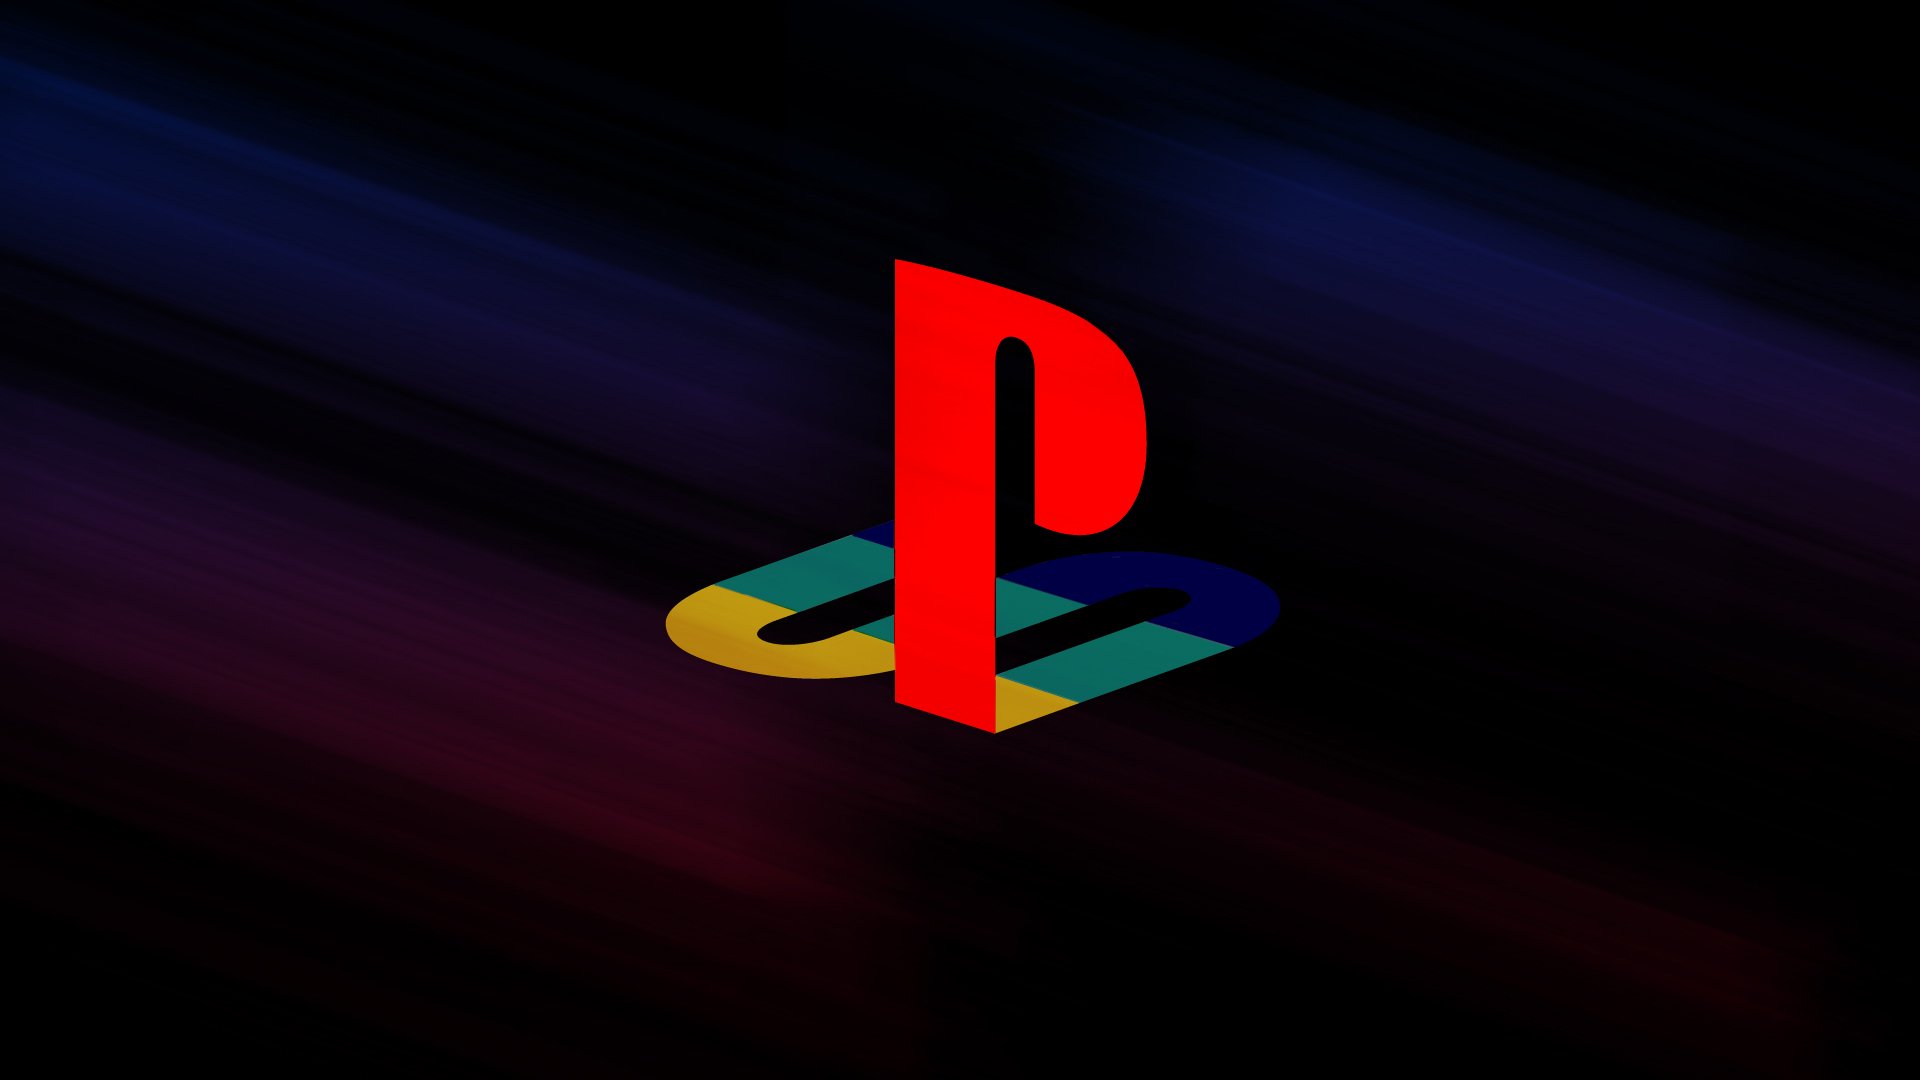 PS3 Wallpapers HD